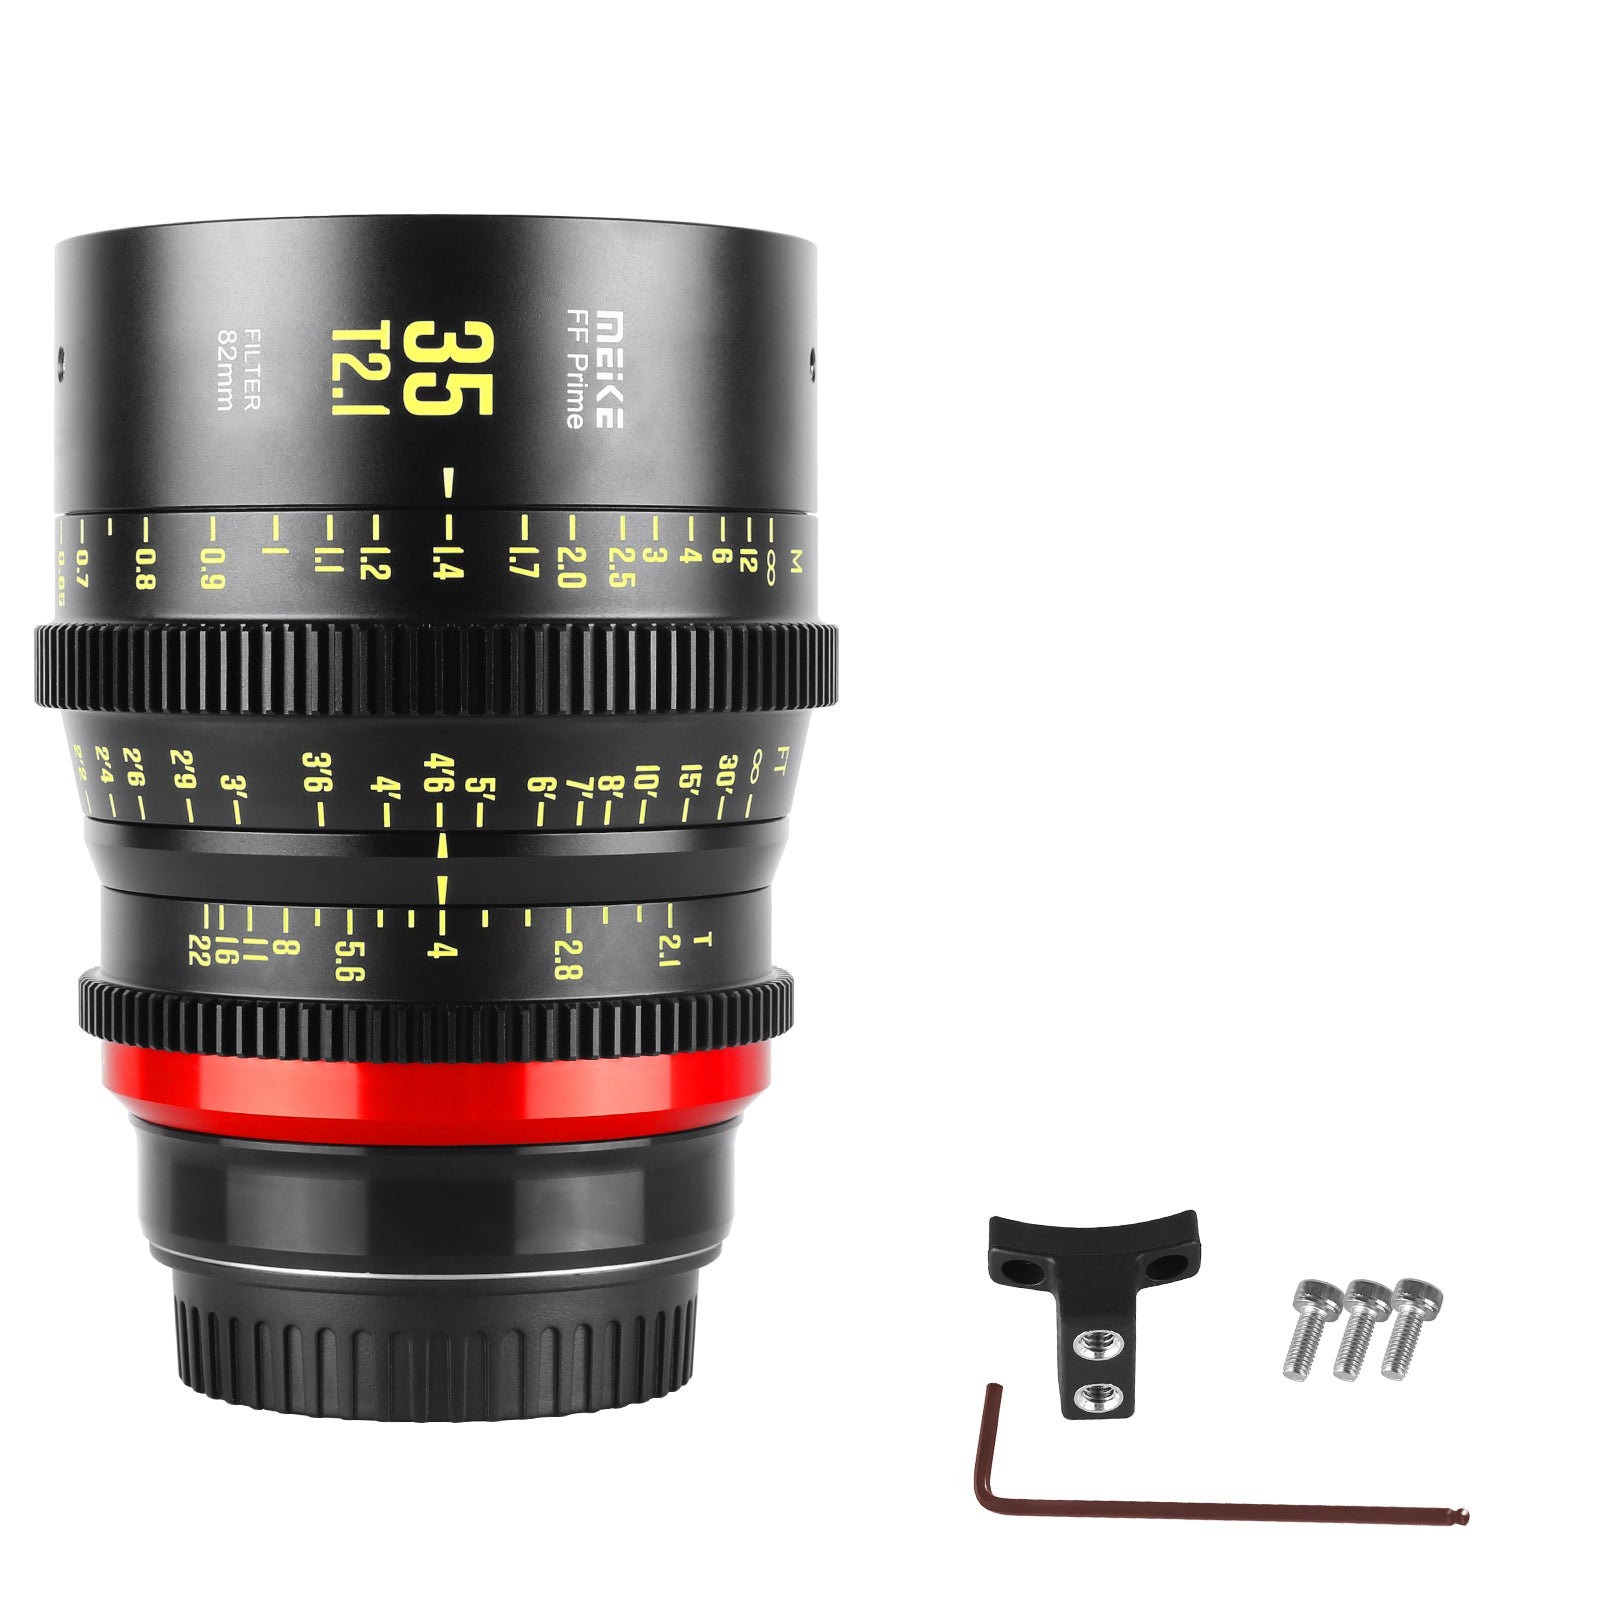 Meike Cinema Full Frame 35mm T2.1 Lens (EF Mount) with Accessories